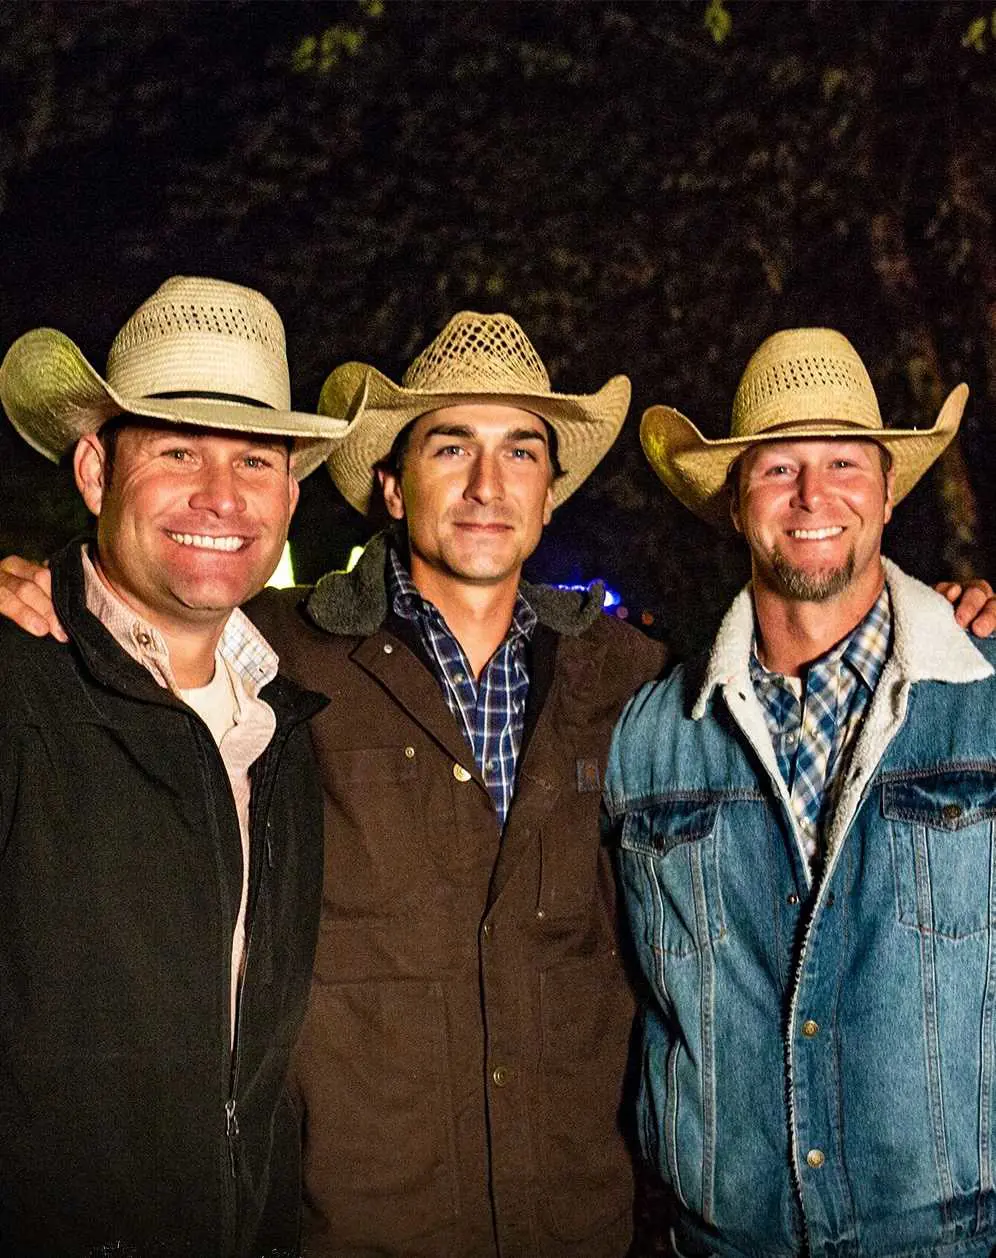 The Cowboy Way is an INSP original reality series featuring three modern-day cowboys, (from left) Booger Brown, Cody Harris, and Bubba Thompson